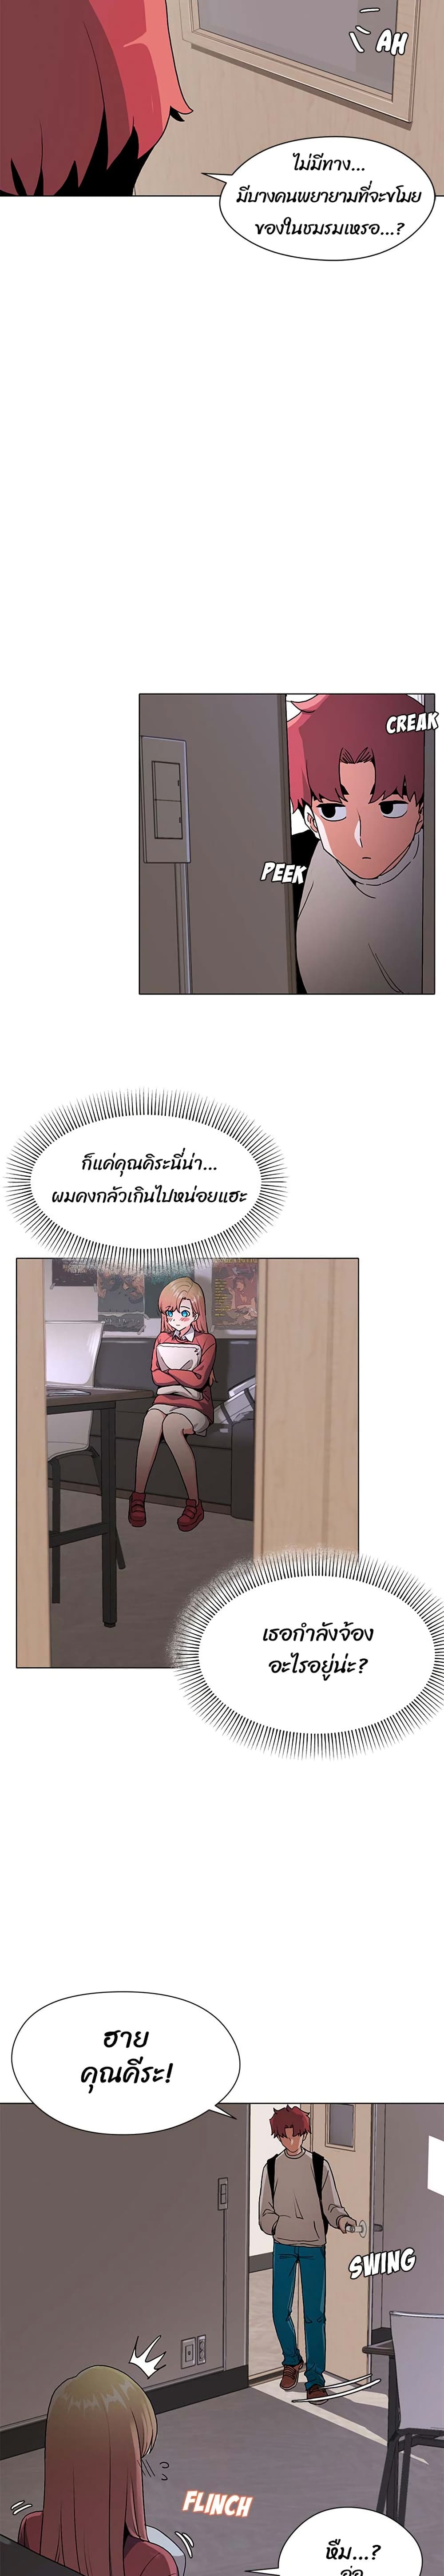 College Life Starts With Clubs 1 ภาพที่ 33